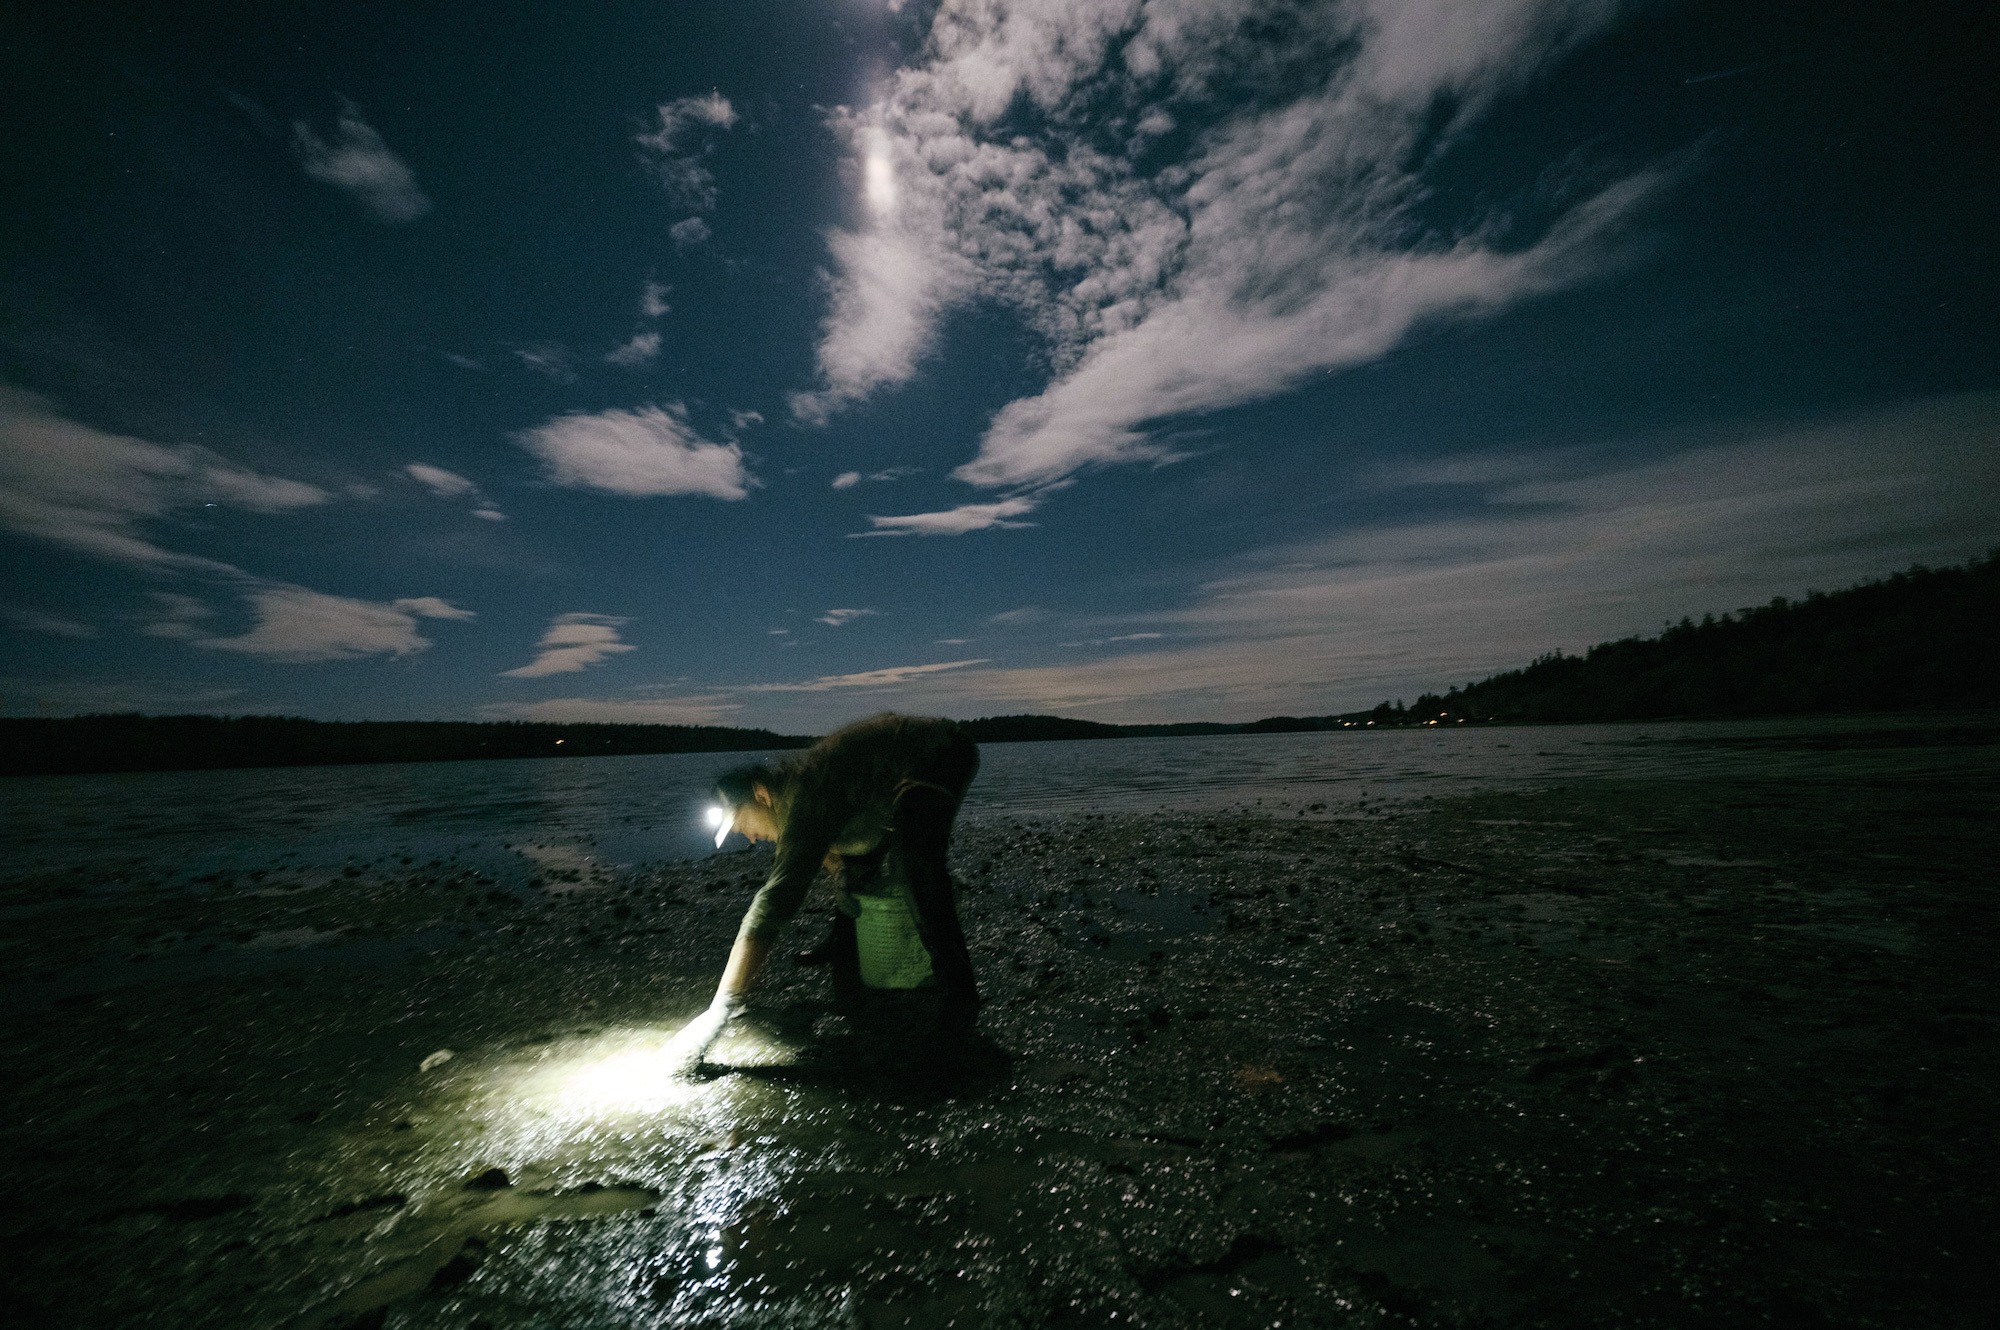 Stuart Thomas, manager of the Swinomish Shellfish Company, harvests oysters on Similk Beach during an October low tide.